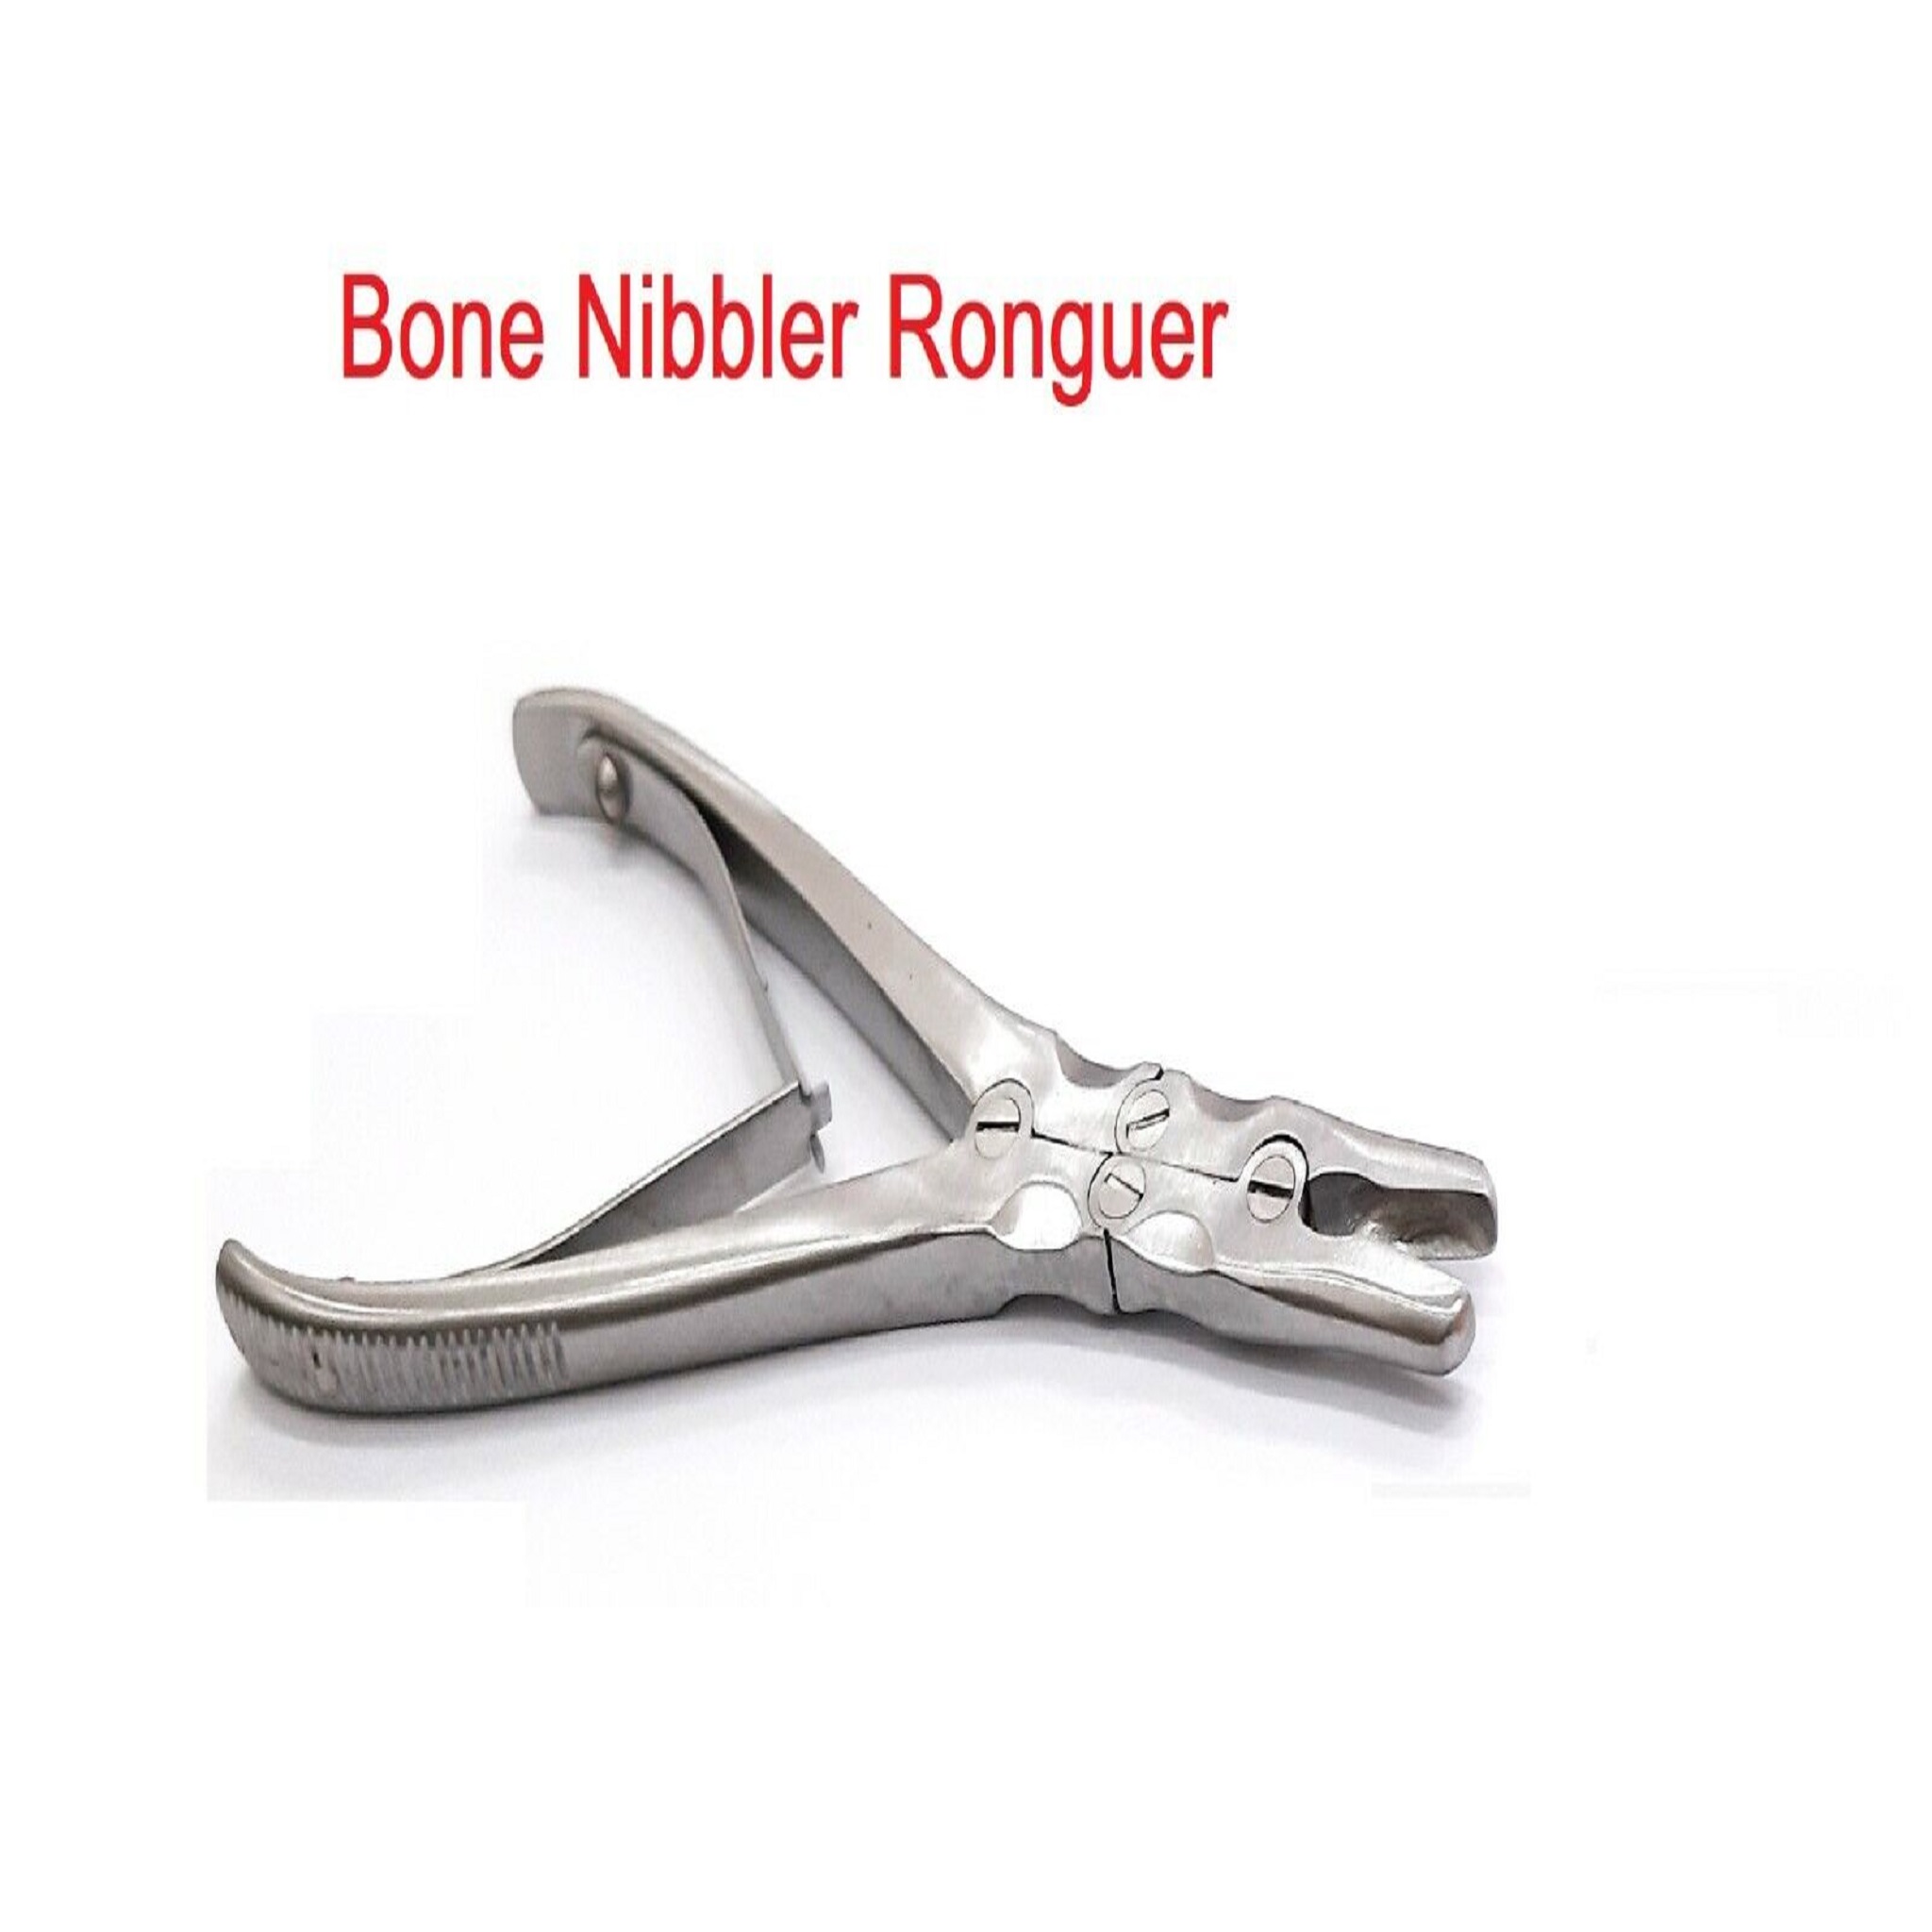 Orthopedic Bone Nibbler Ronguer Compound action Surgical instrument SS